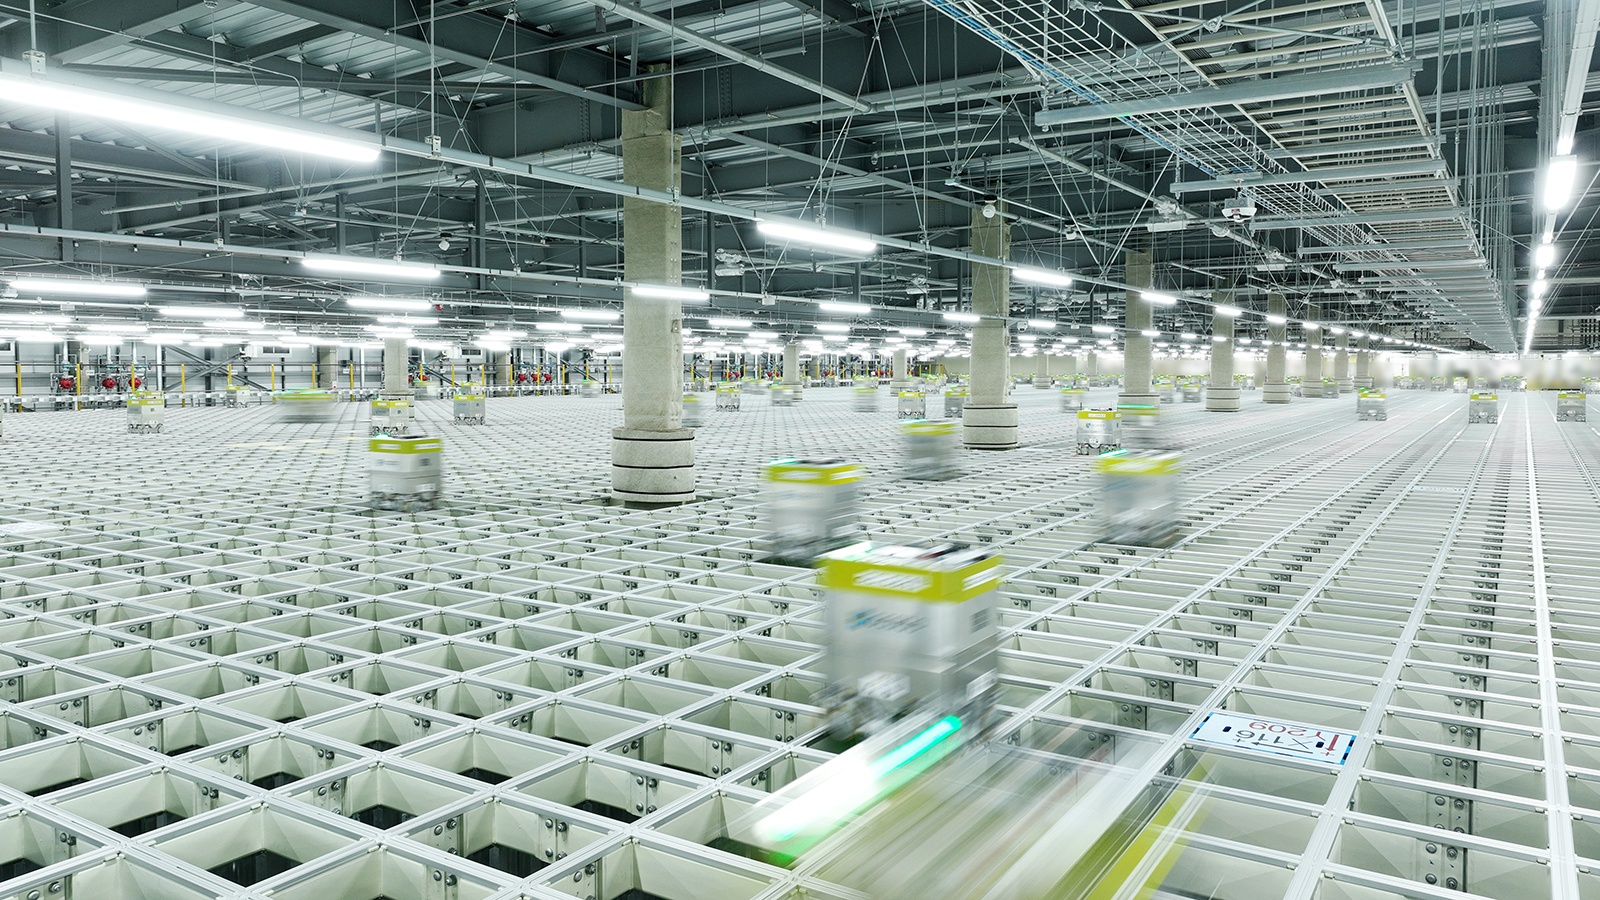 Ocado Technology and Aeon partner to build third robotic warehouse in Japan